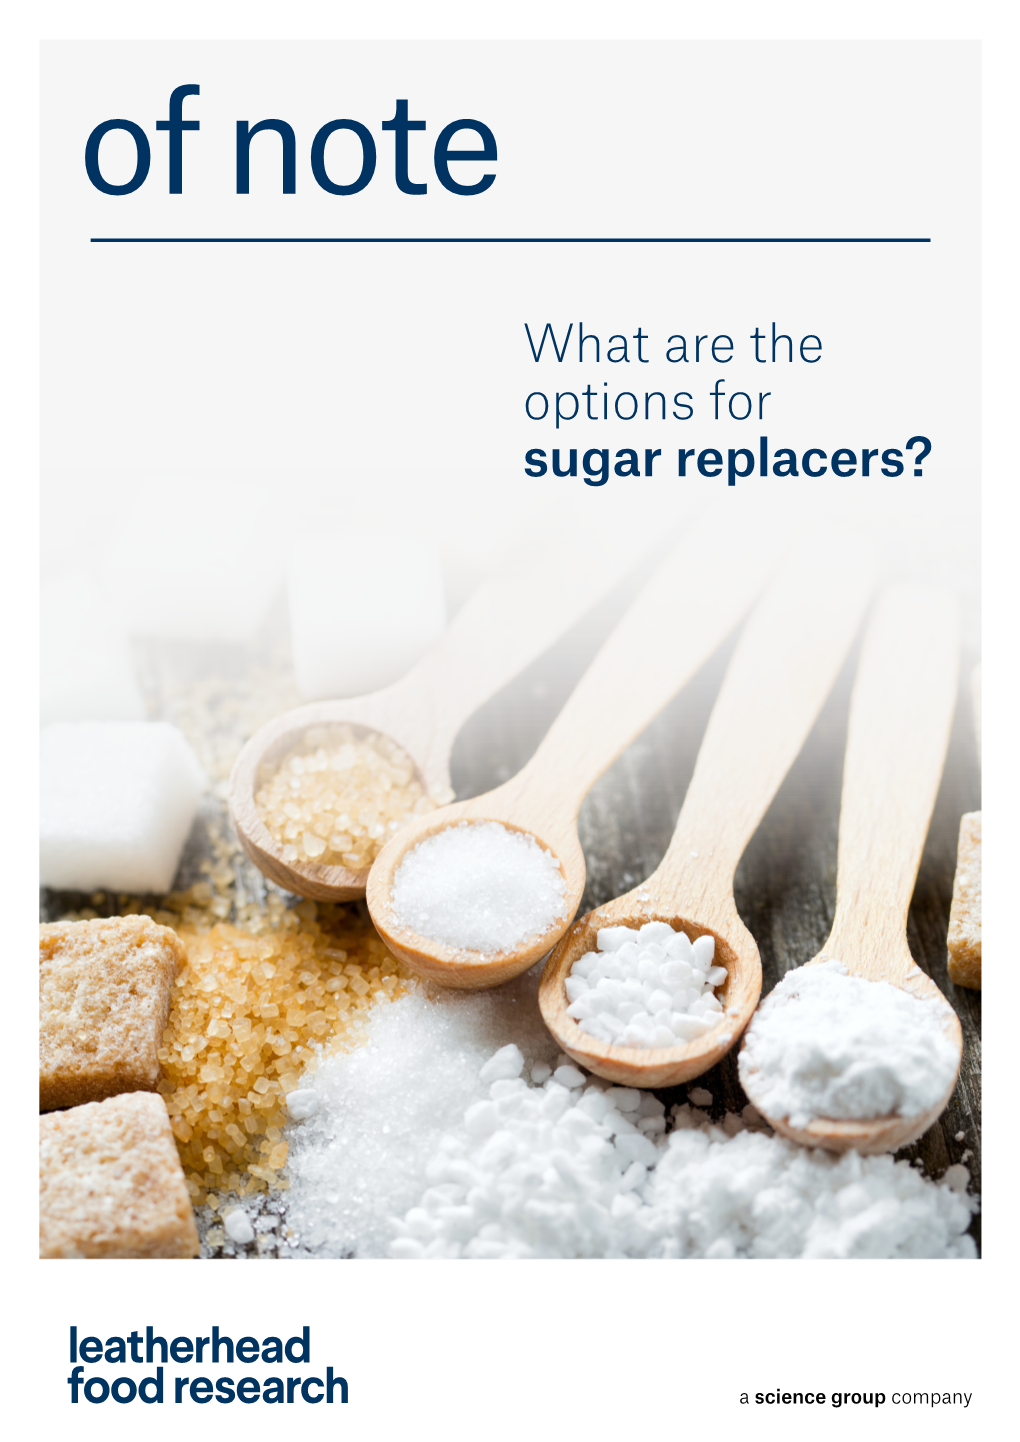 What Are the Options for Sugar Replacers?